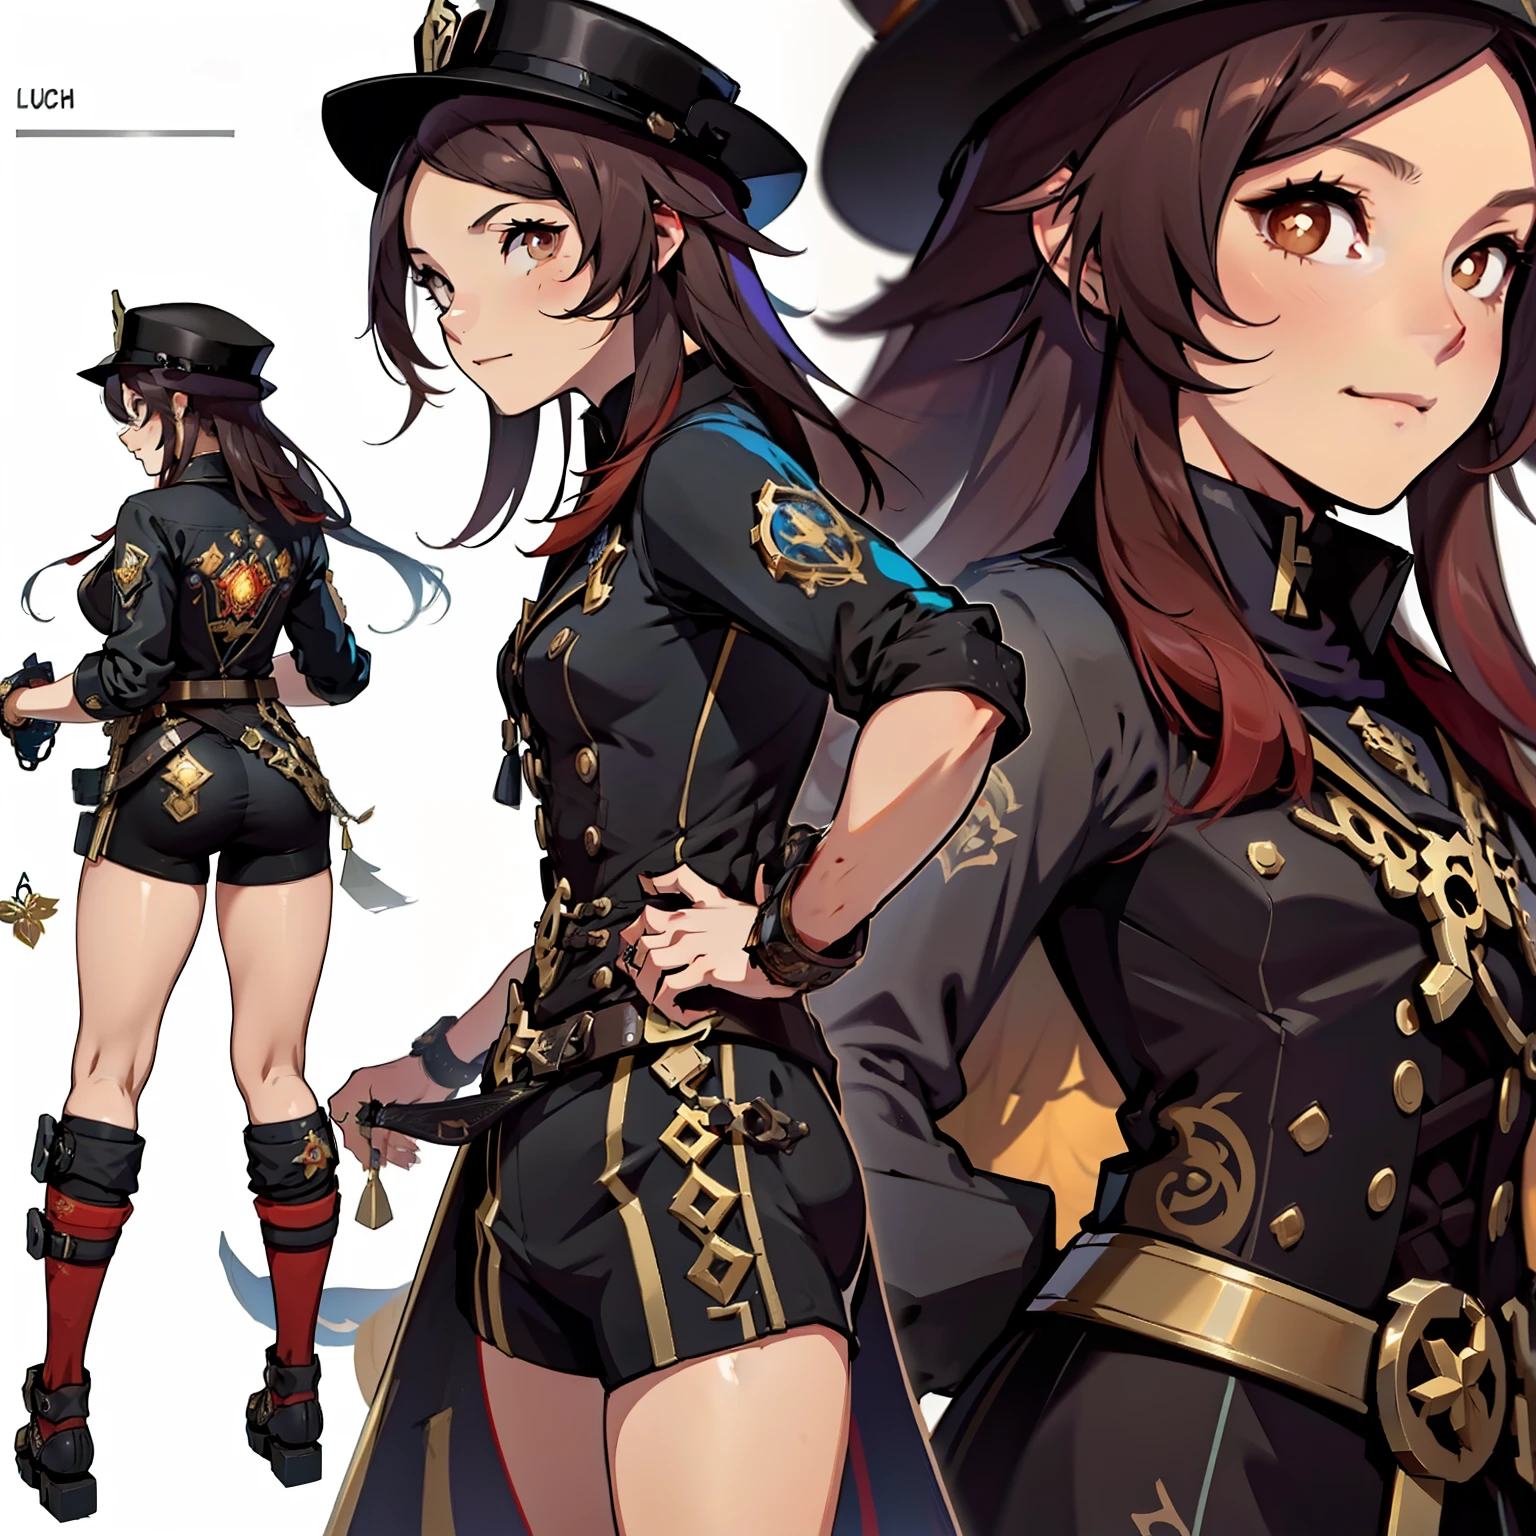 Close-up of a girl in a gun costume, ((character concept art)), ((character design sheet, same character, front, side, back)) maple story character art, video game character design, video game character design, maple story gun girl, expert high detail concept art, metal bullet concept art, funny character design, Lucio as a woman, gravity rush inspiration, sticky tar. Concept art, belt buckle at waist, steampunk weapon,